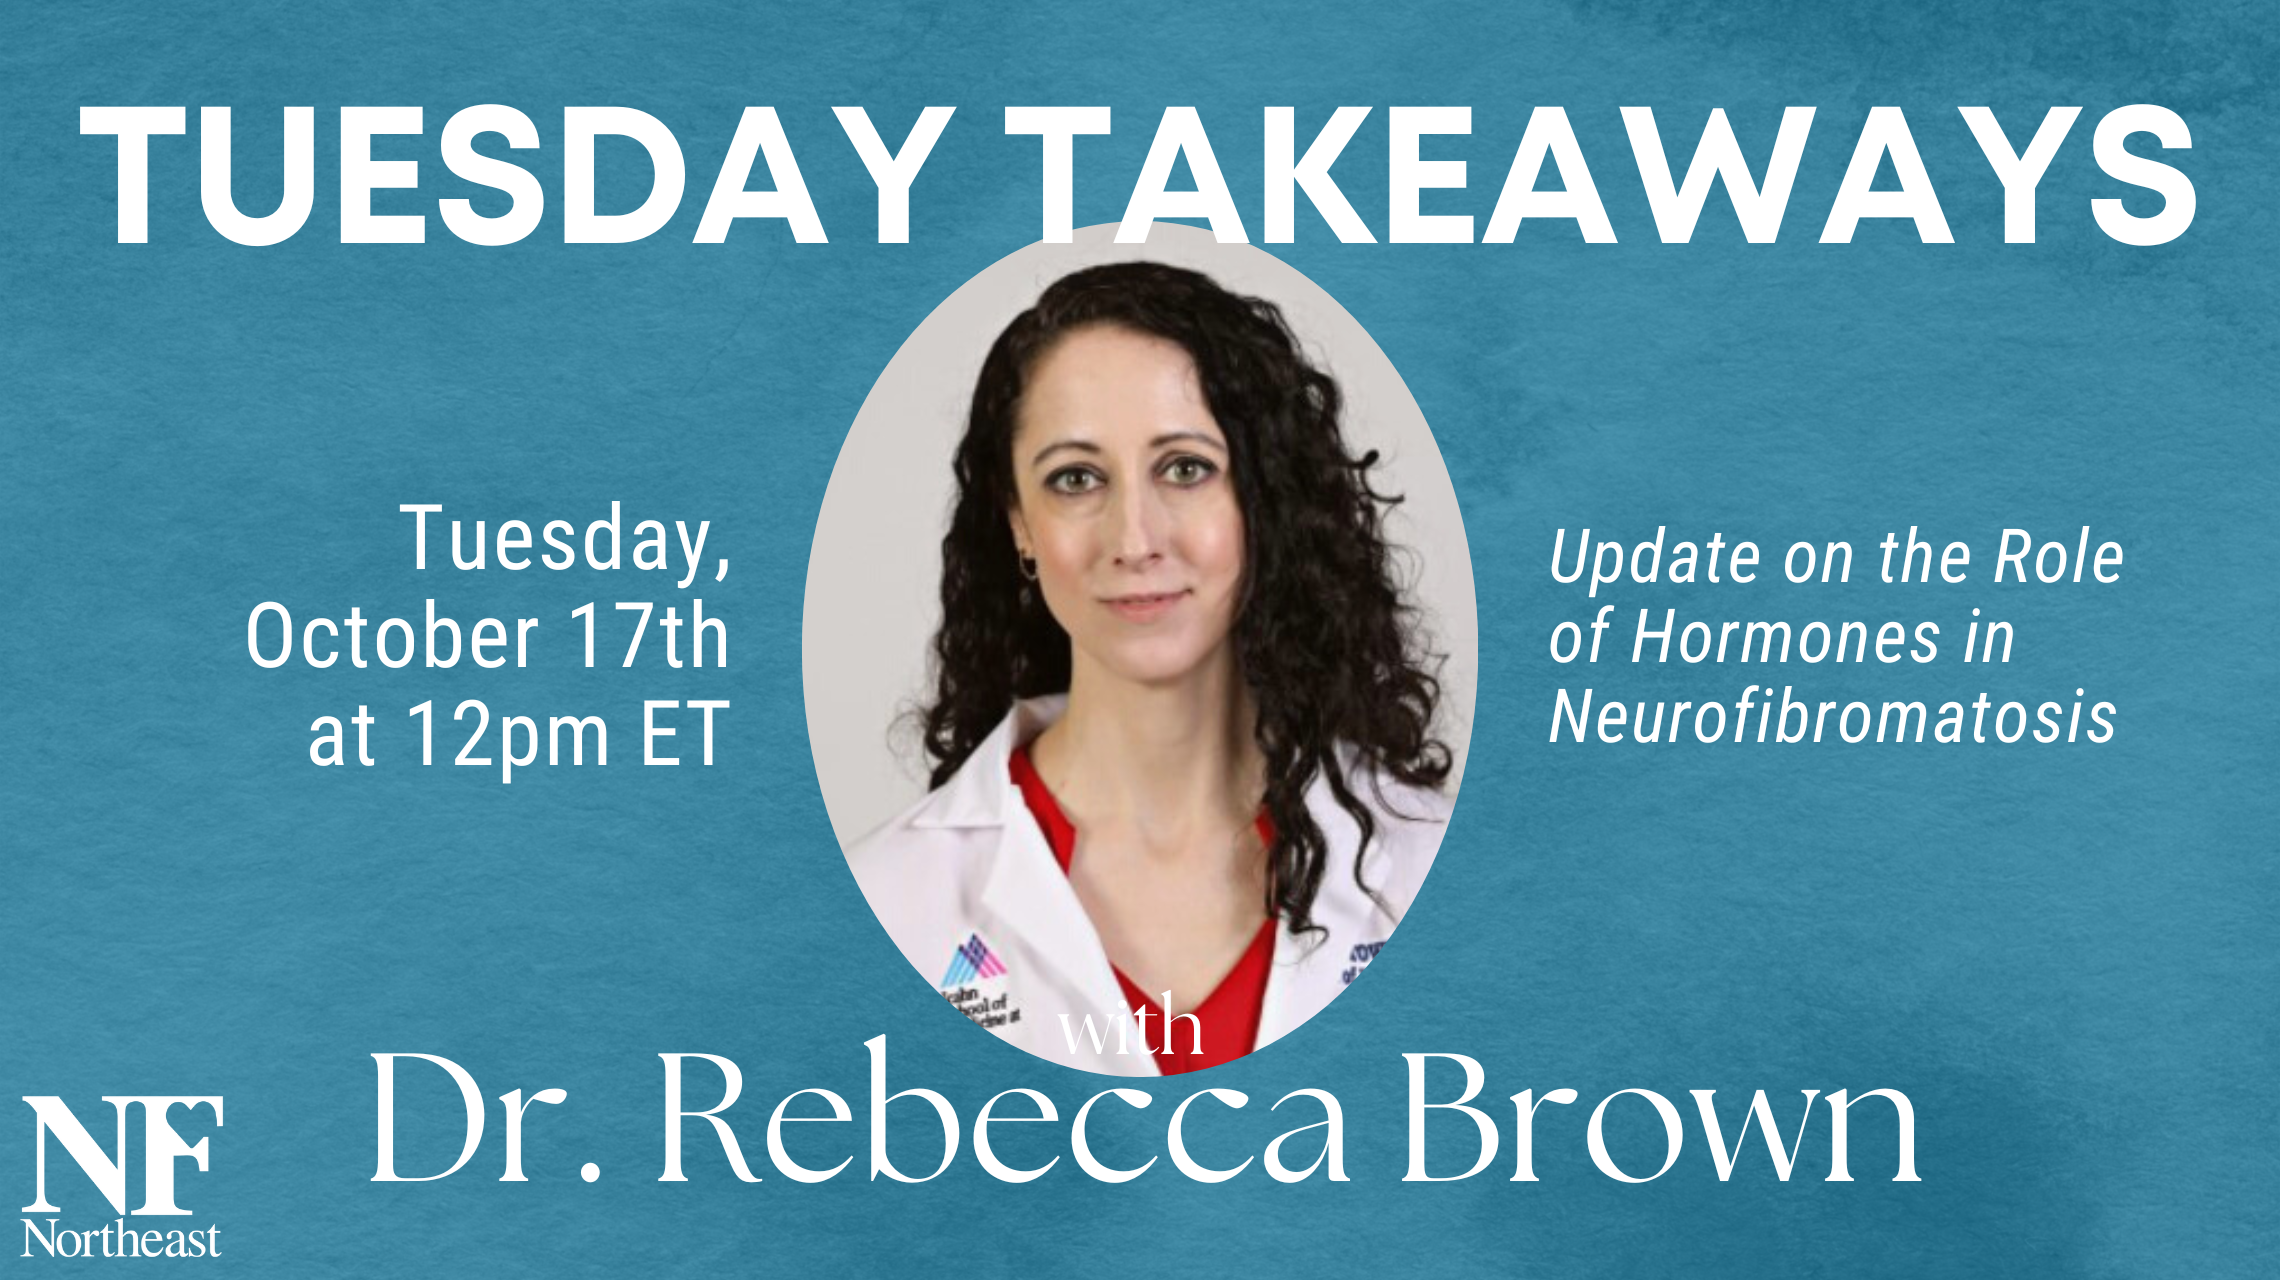 Tues Takeaways October graphic featuring headshot of Dr. Rebecca Brown